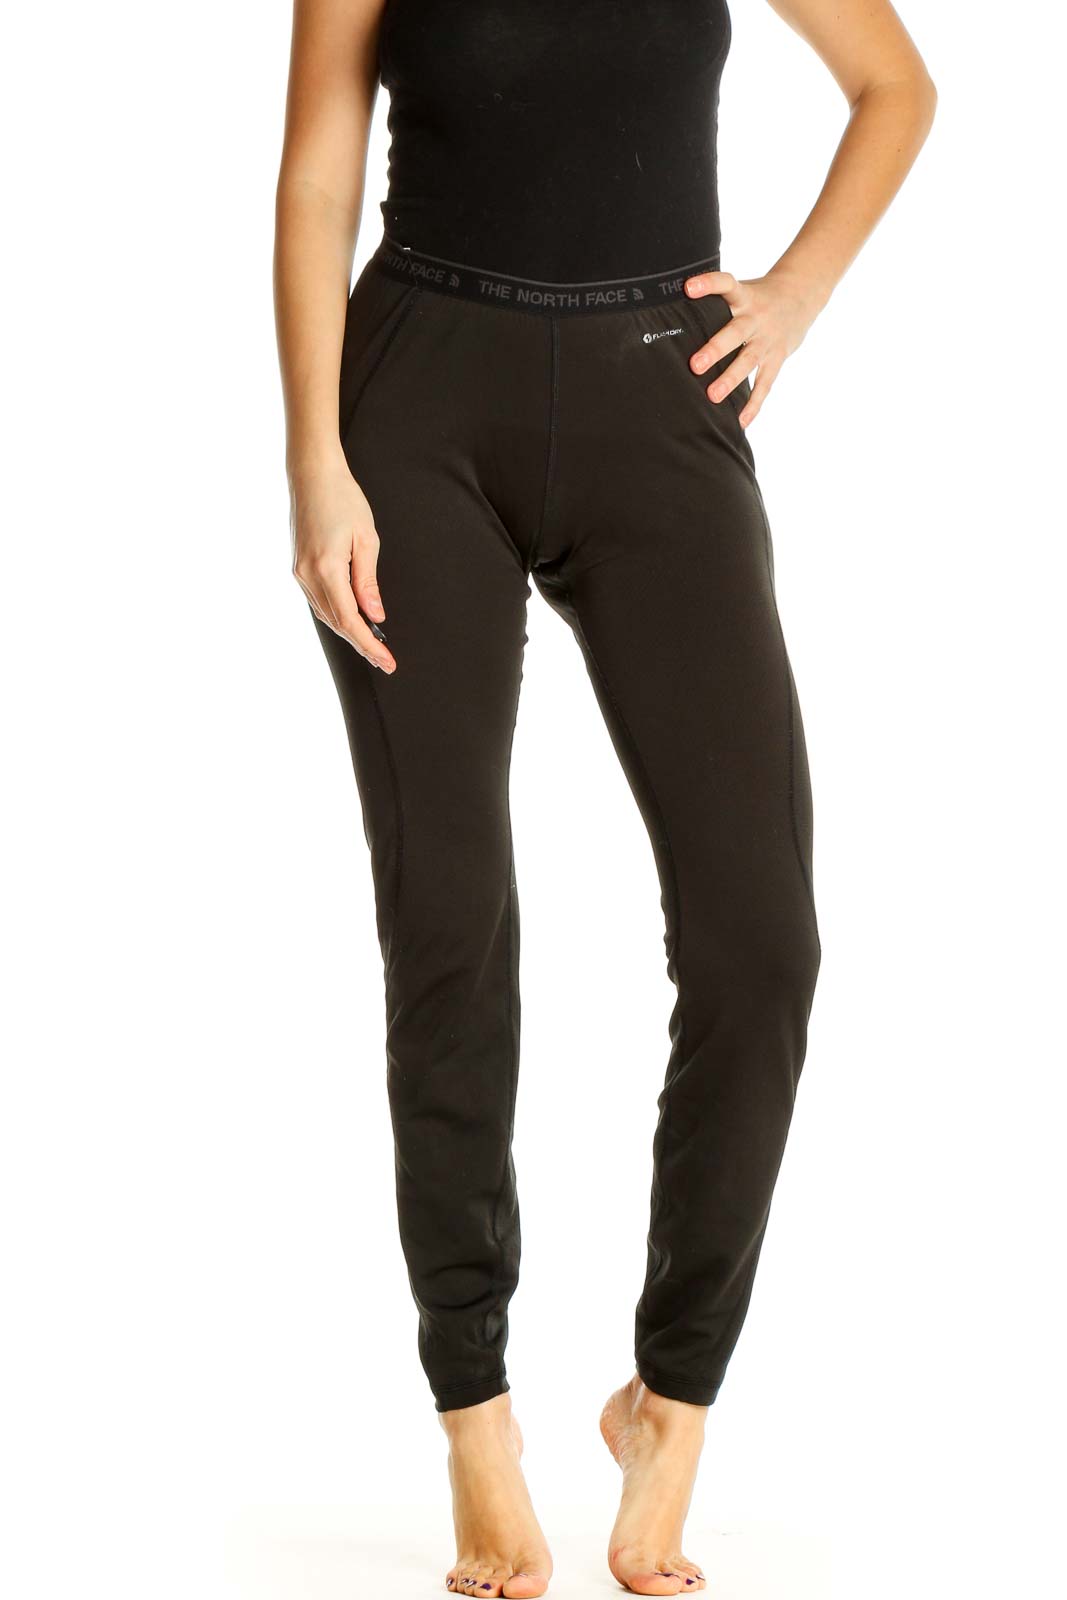 Black Solid Casual Leggings Front